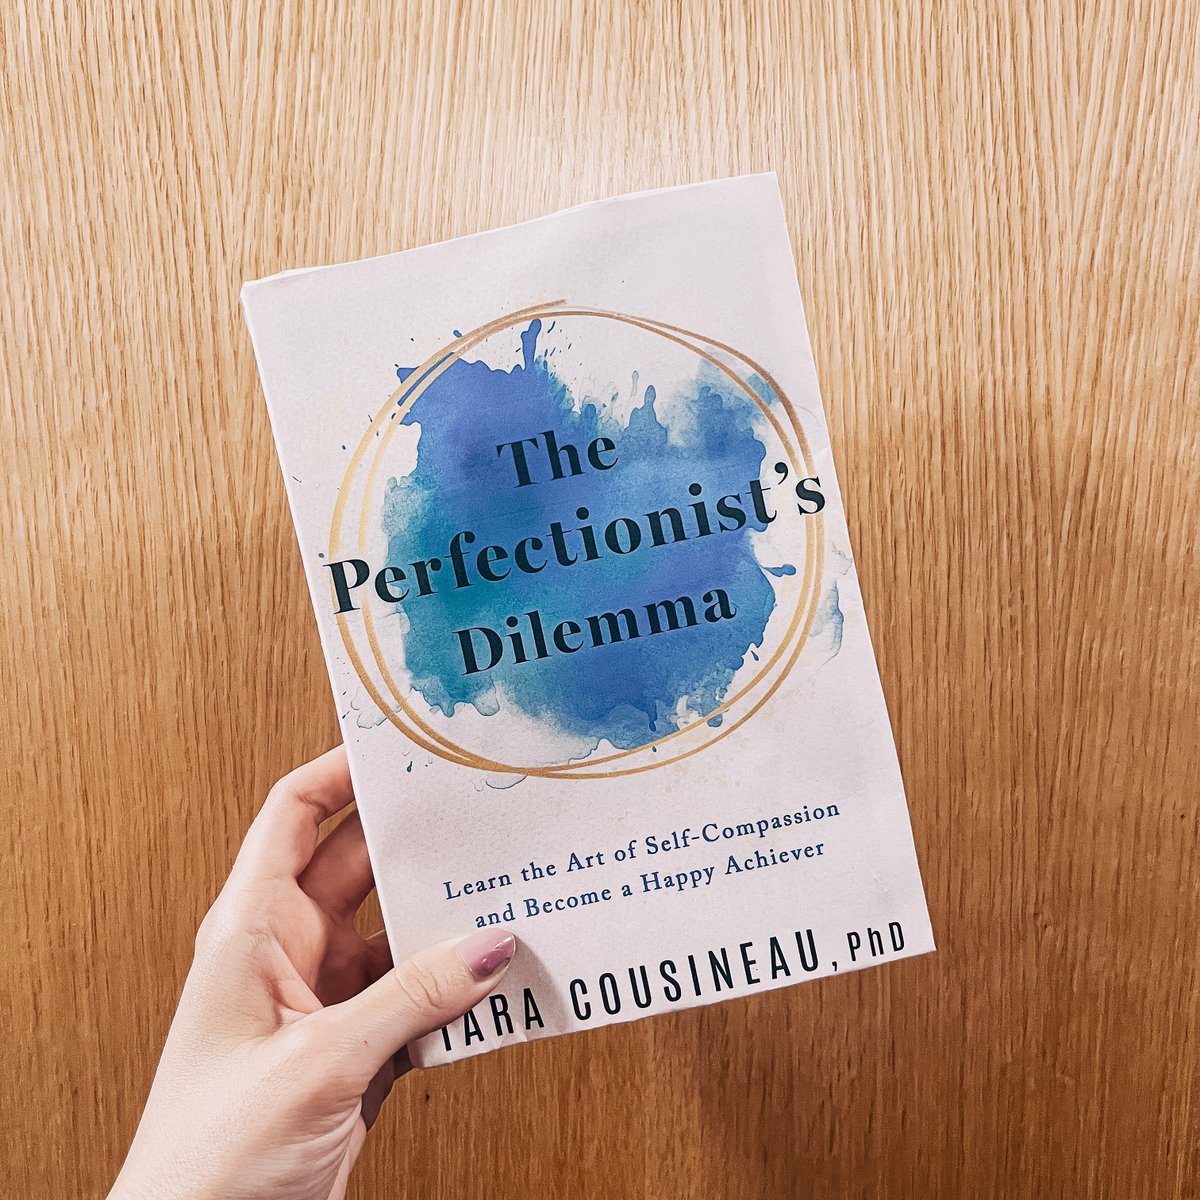 We're excited to share the cover for @taracousphd's ✍️THE PERFECTIONIST'S DILEMMA😅 out 1/7/2025! Break free of toxic perfectionism by cultivating emotional courage and self-compassion to face life's challenges with a 6-step program. 📣Pre-order now loom.ly/GonEtLY